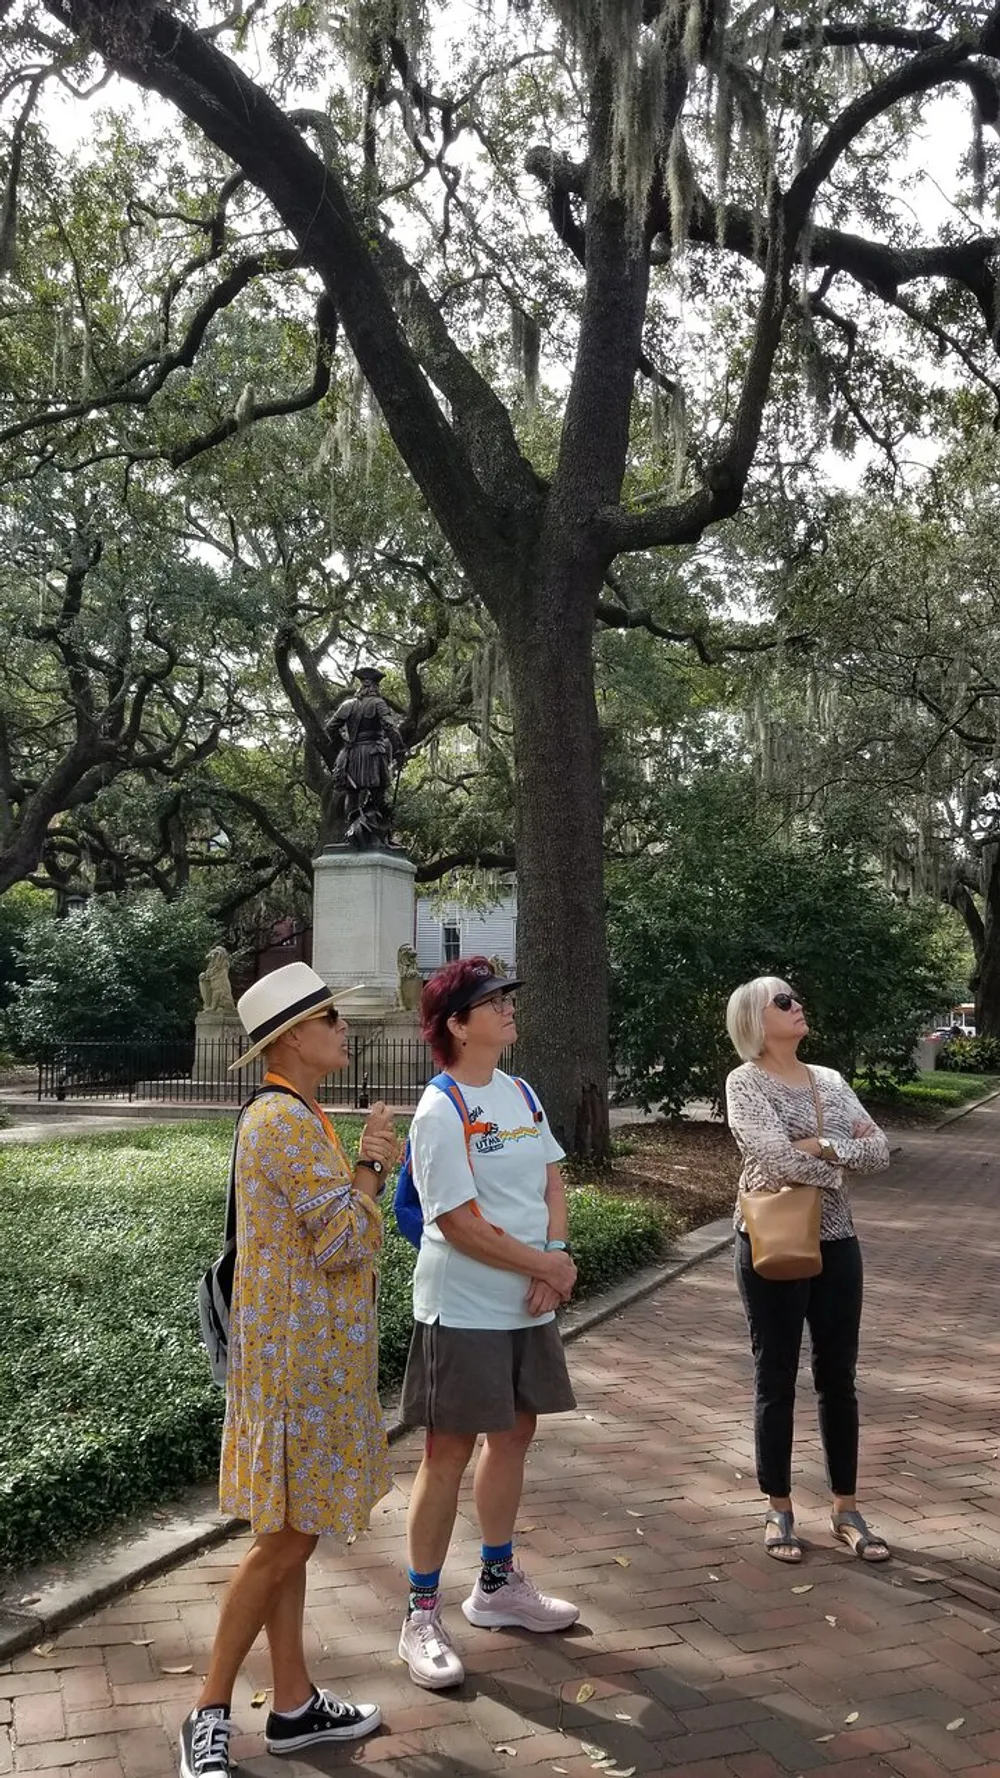 Three people are observing a statue in a park with large oak trees draped with Spanish moss